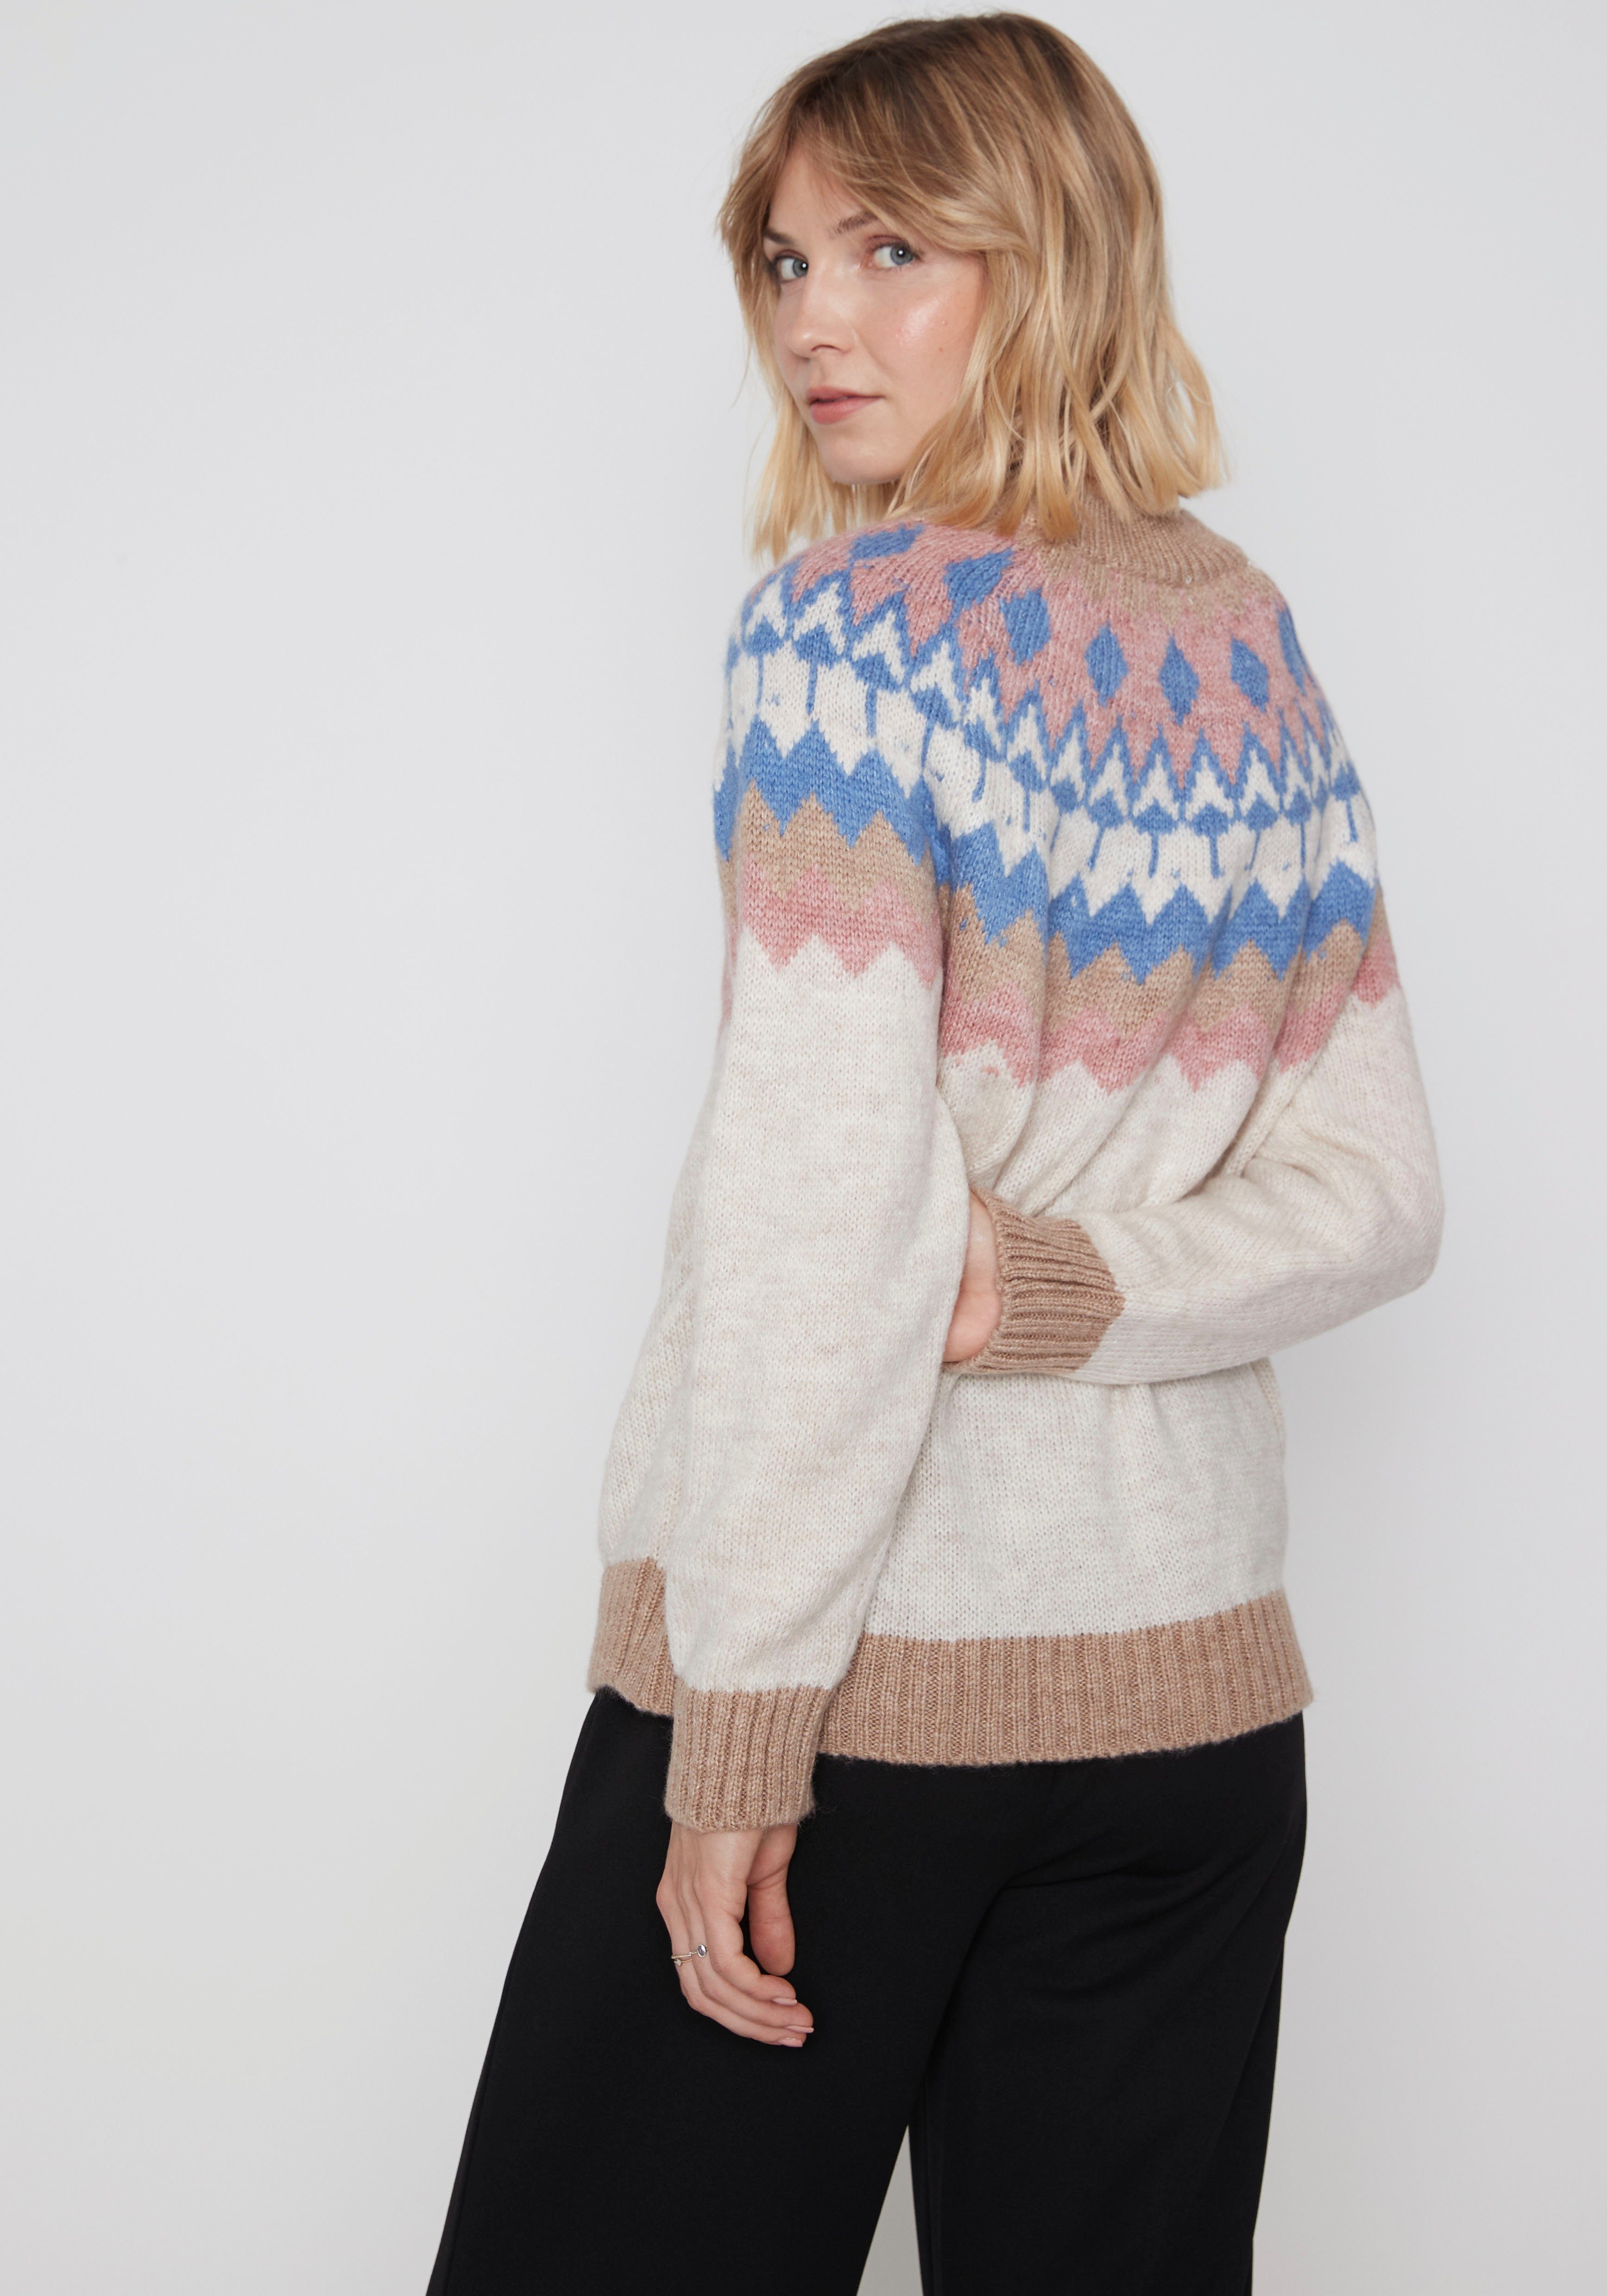 Strickpullover Ma44ni LS HaILY\'S SK A